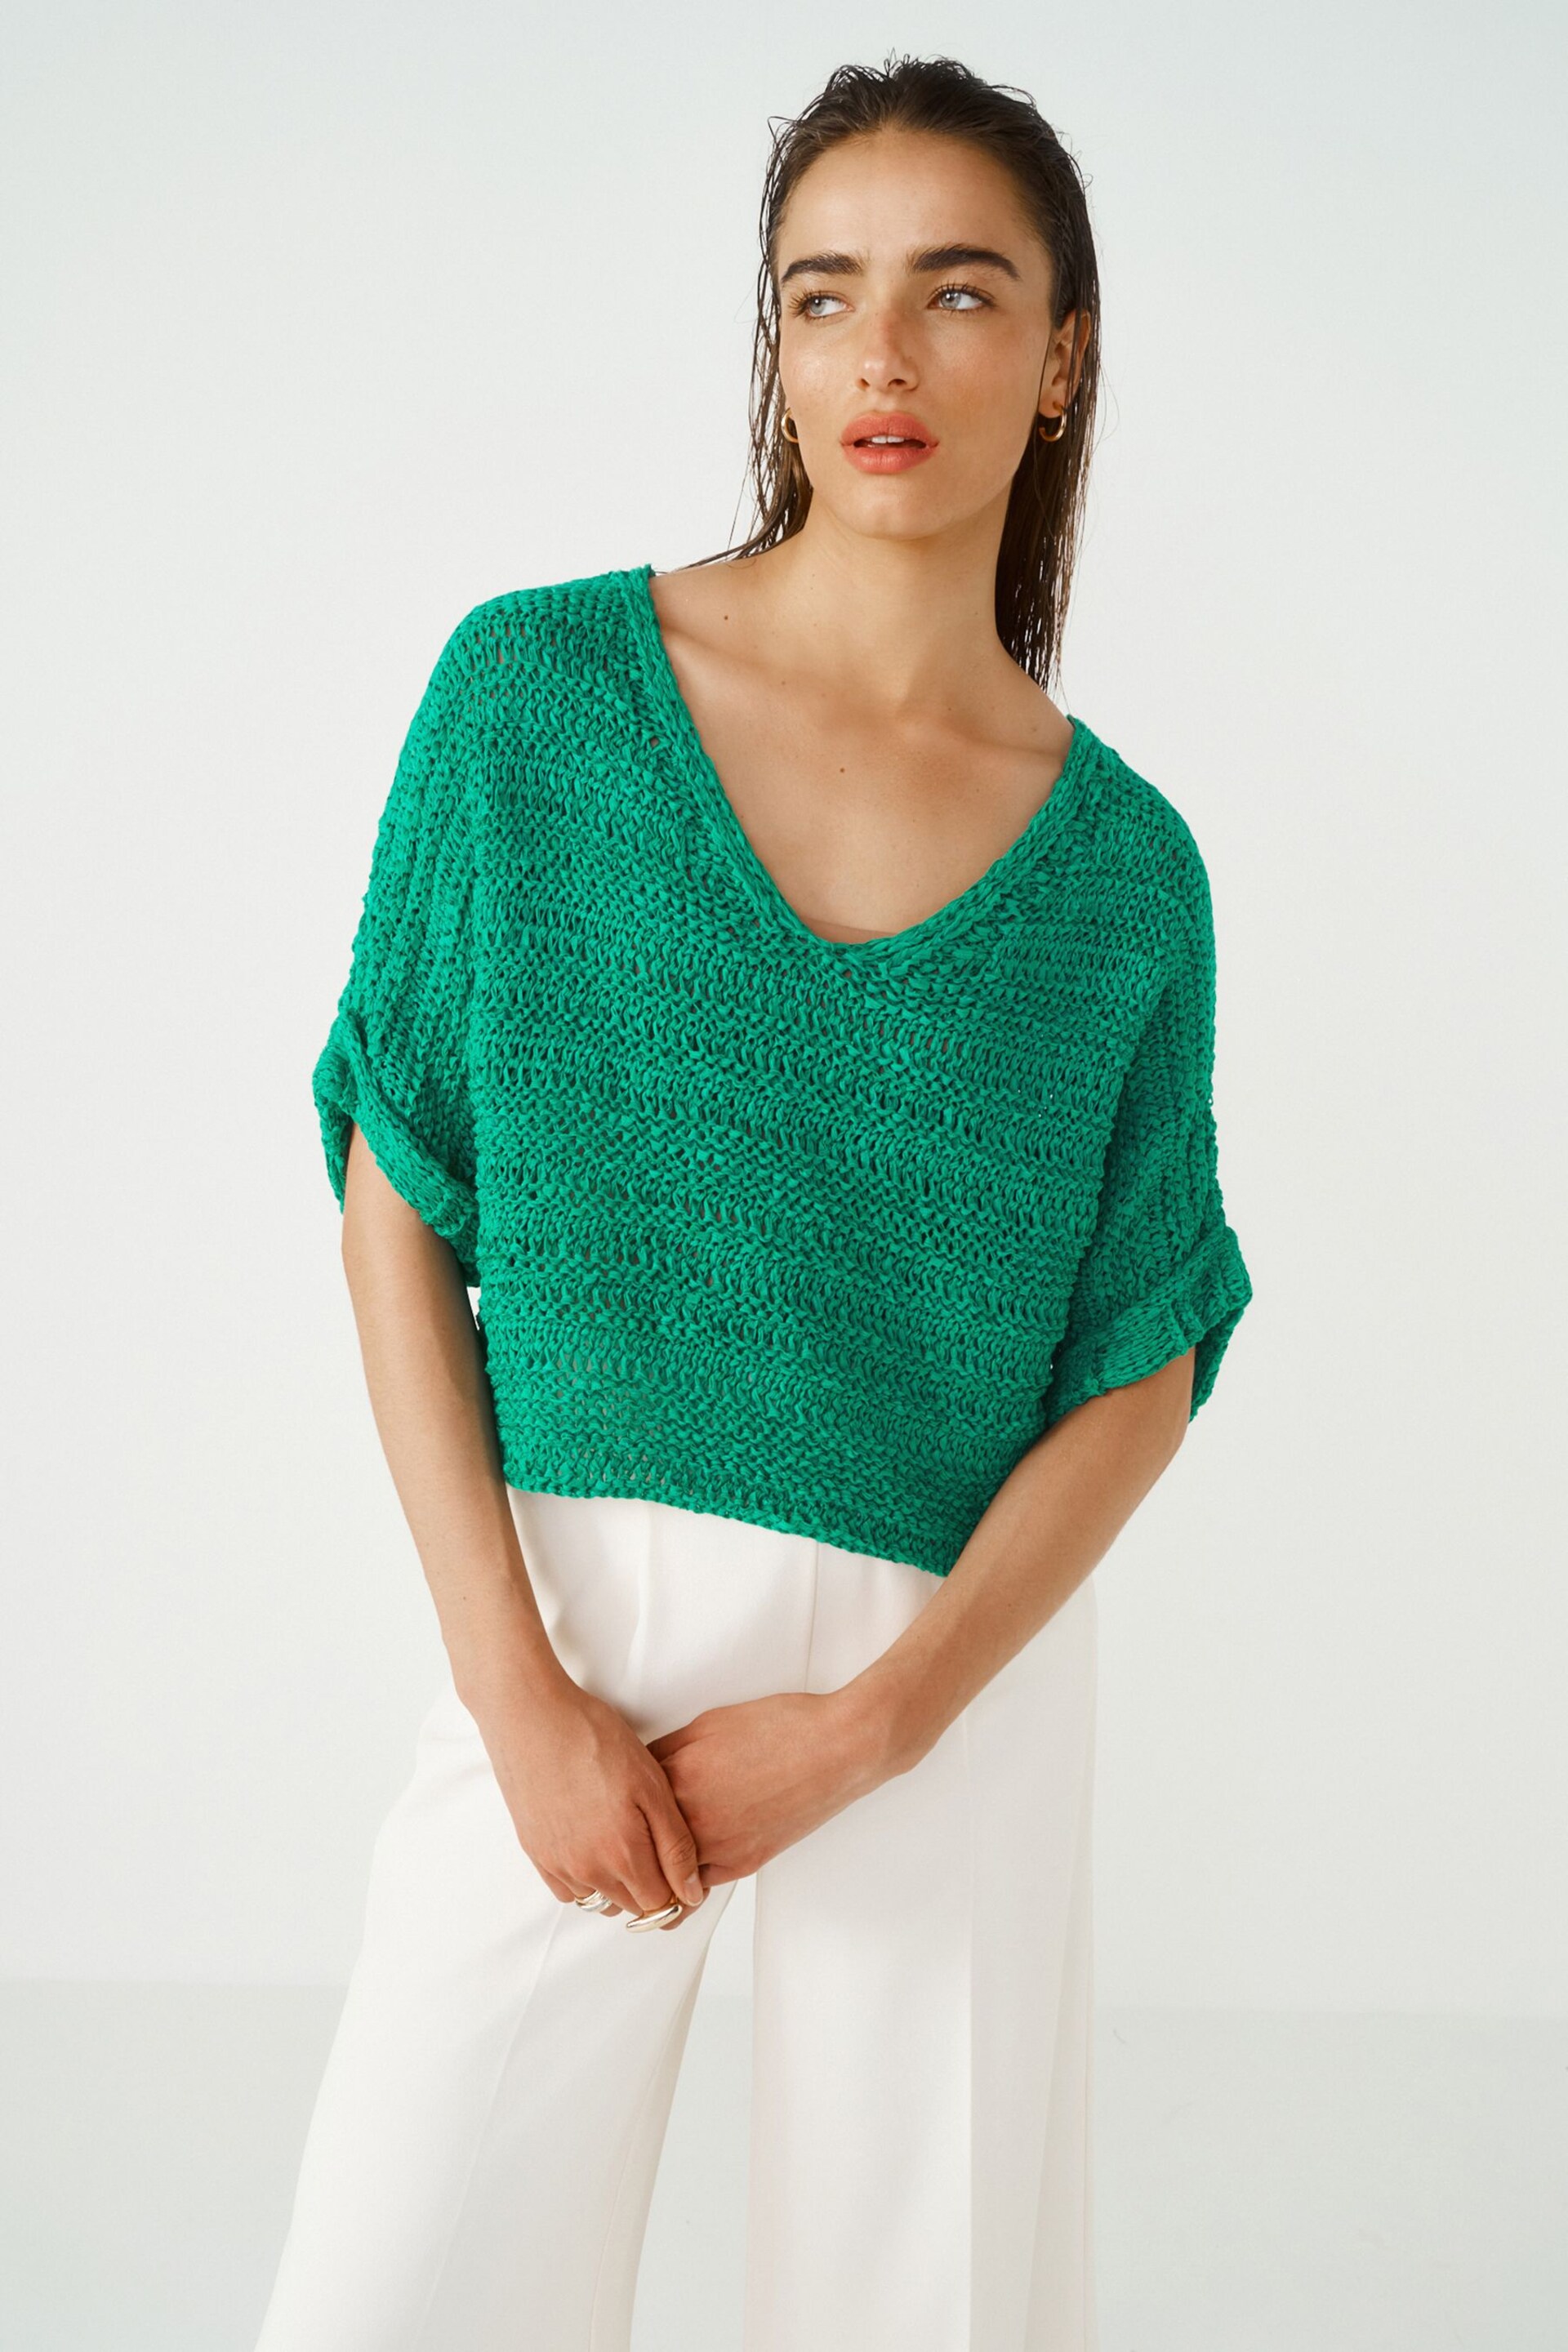 Green Short Sleeve Stitch Top - Image 1 of 5